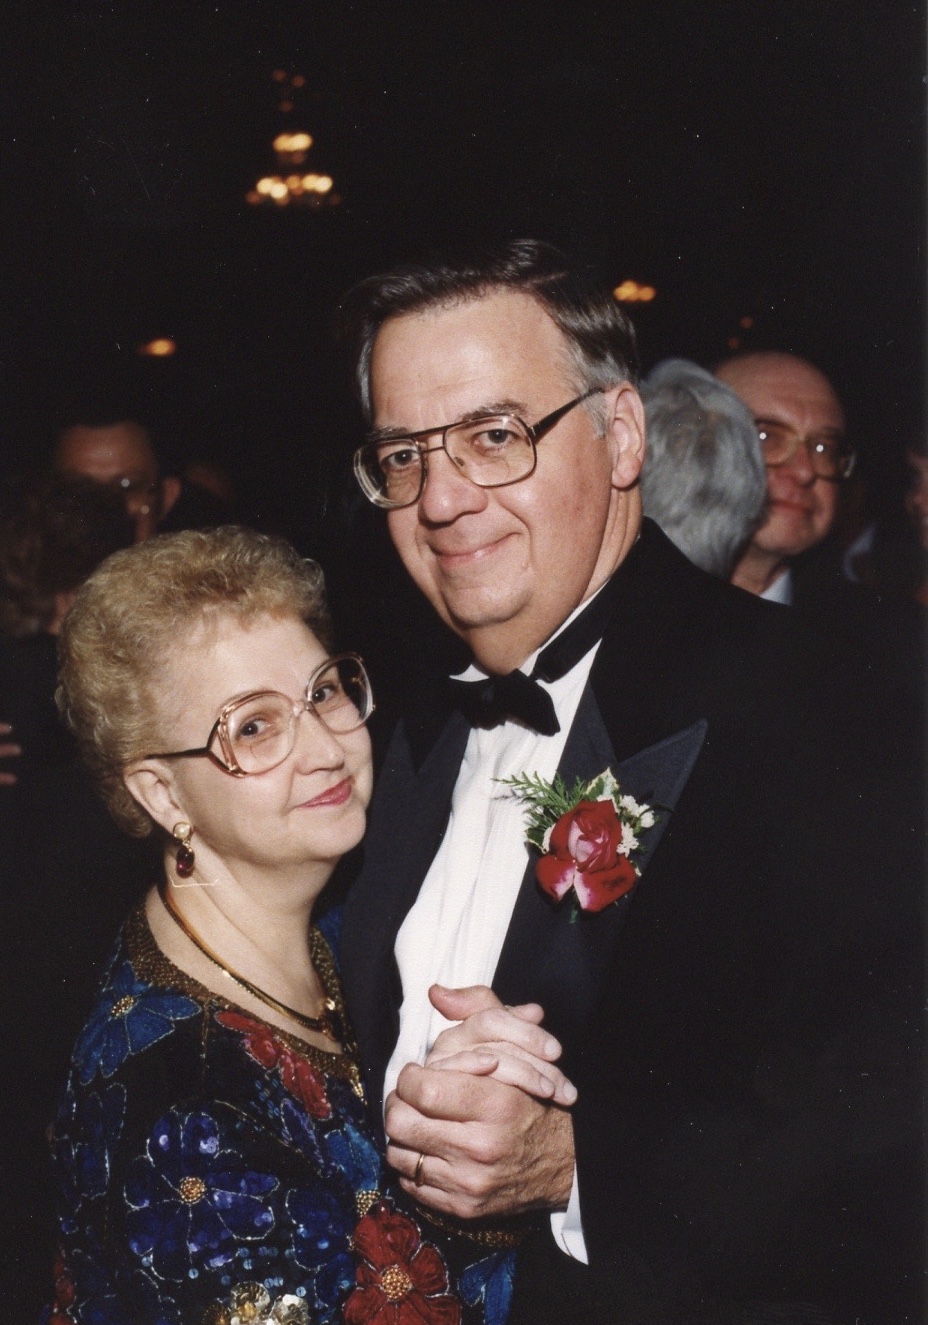 Mom and dad at my wedding, 12-31-97